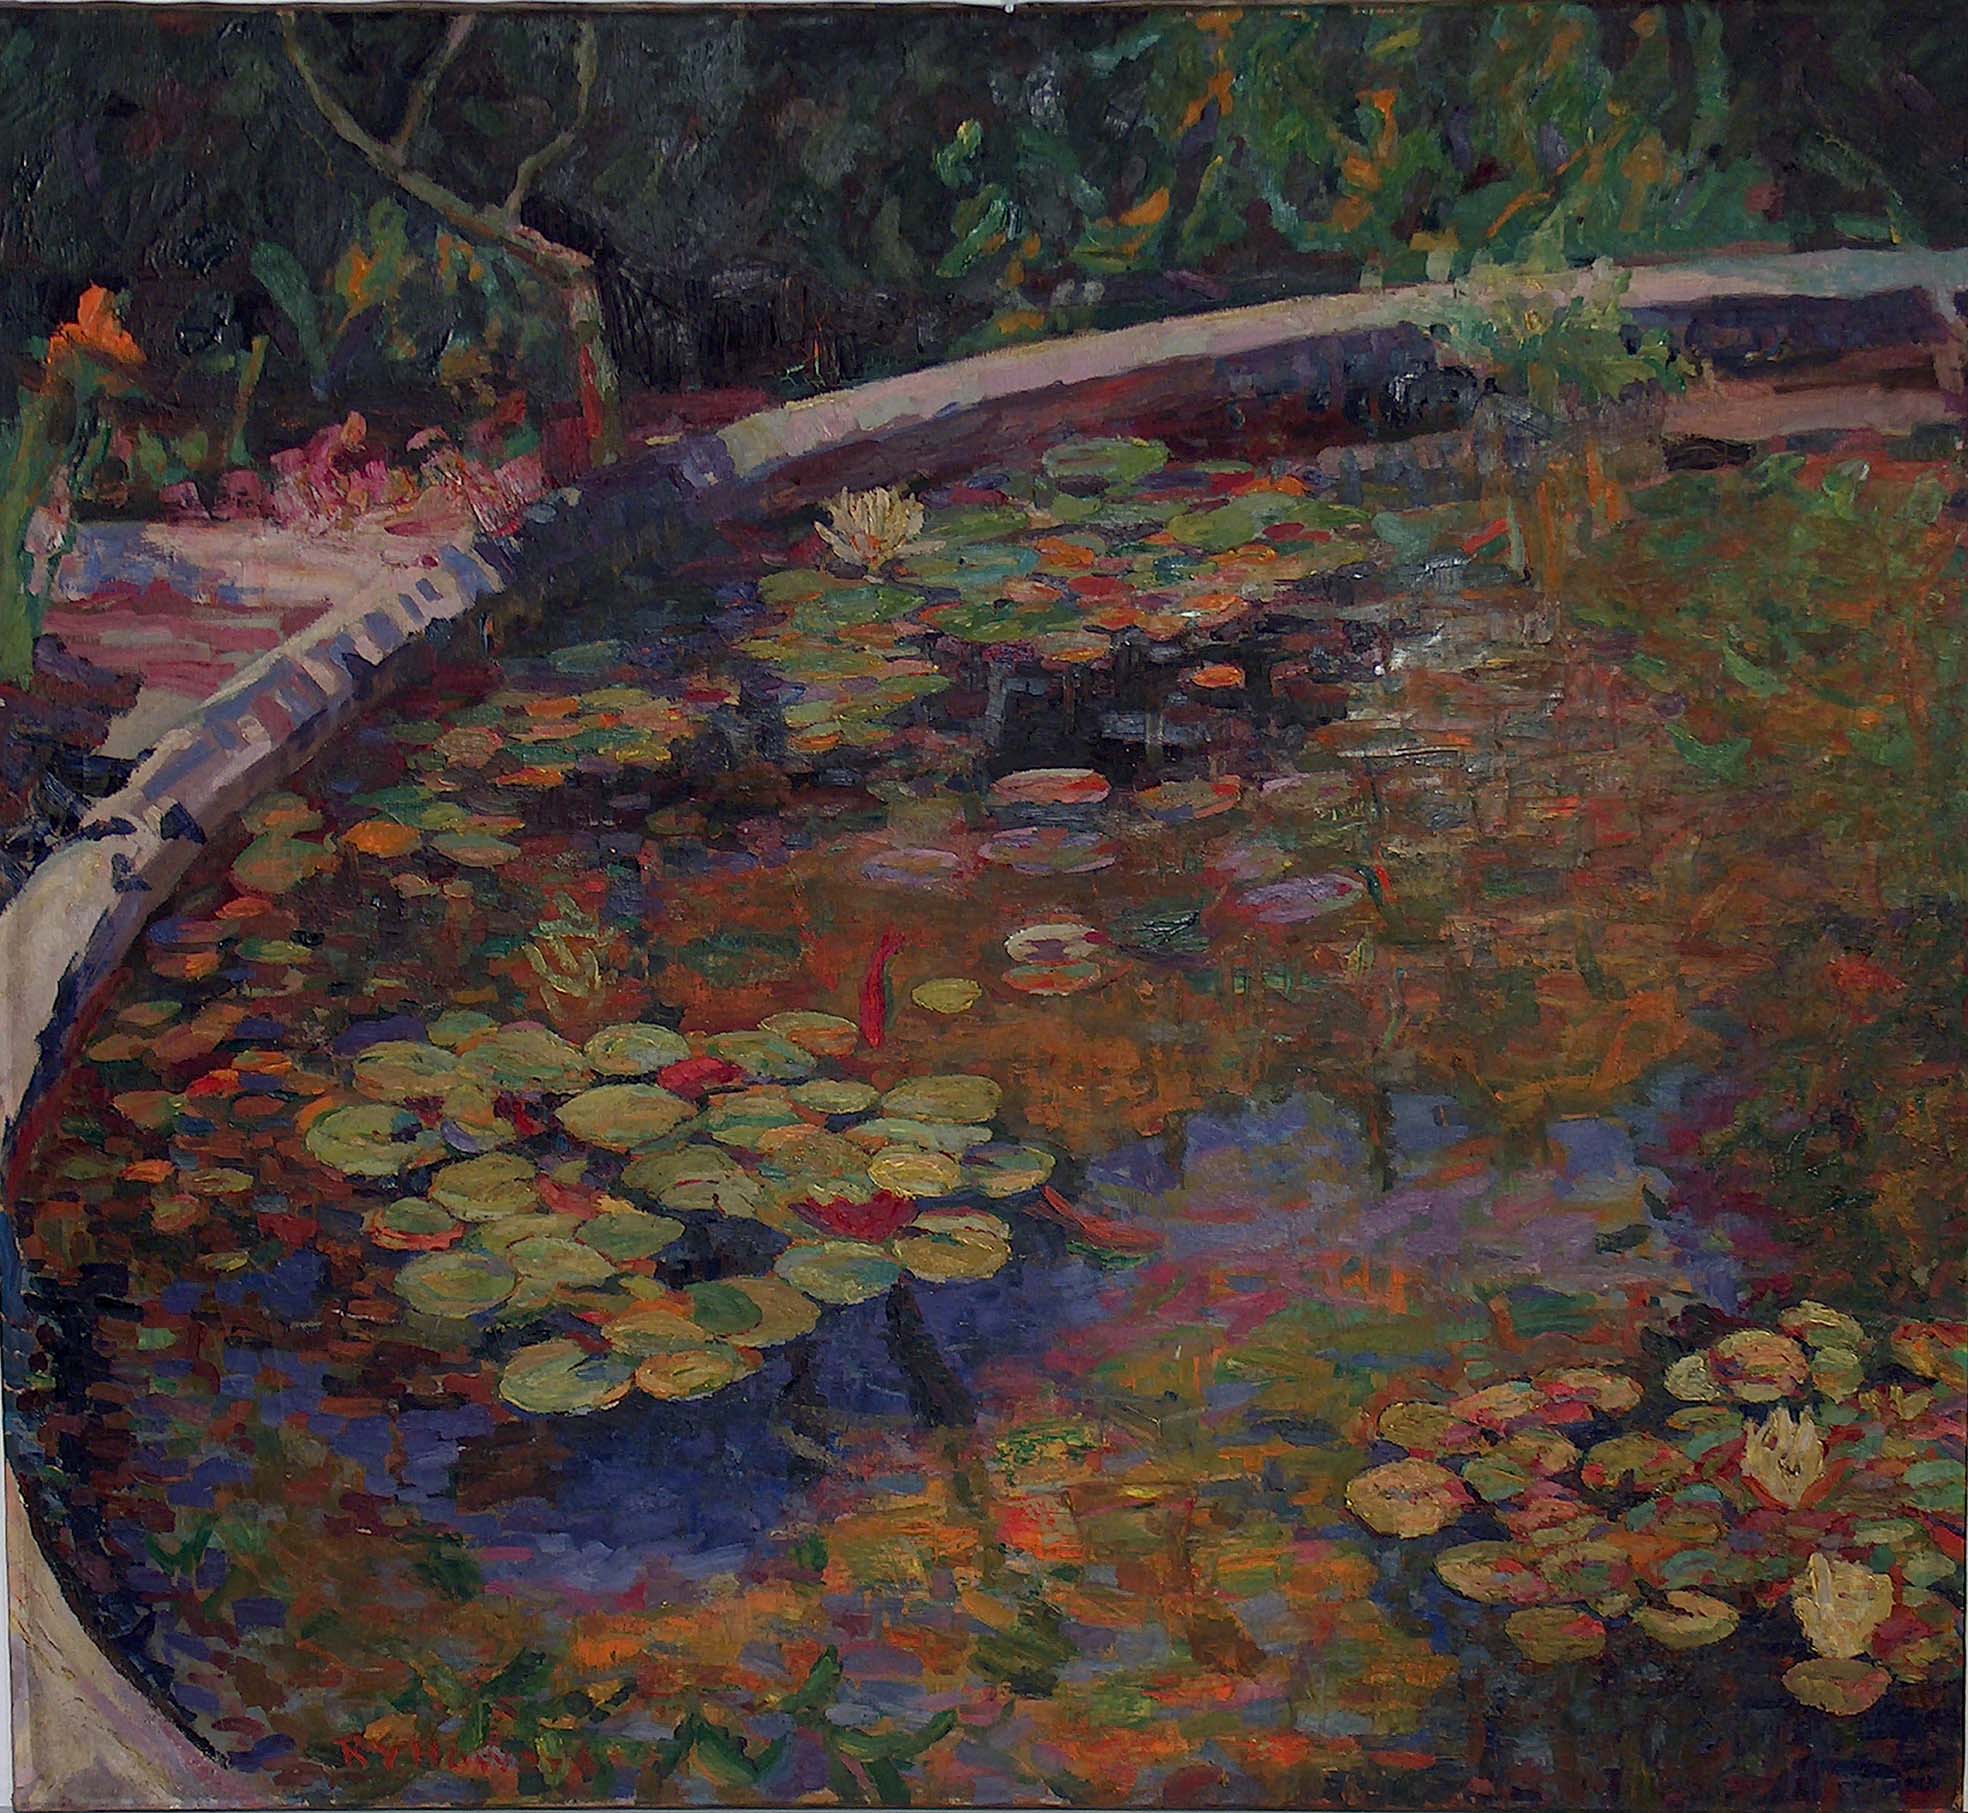 R. Viven Howard, Lily Pond, c. 1928; oil on canvas